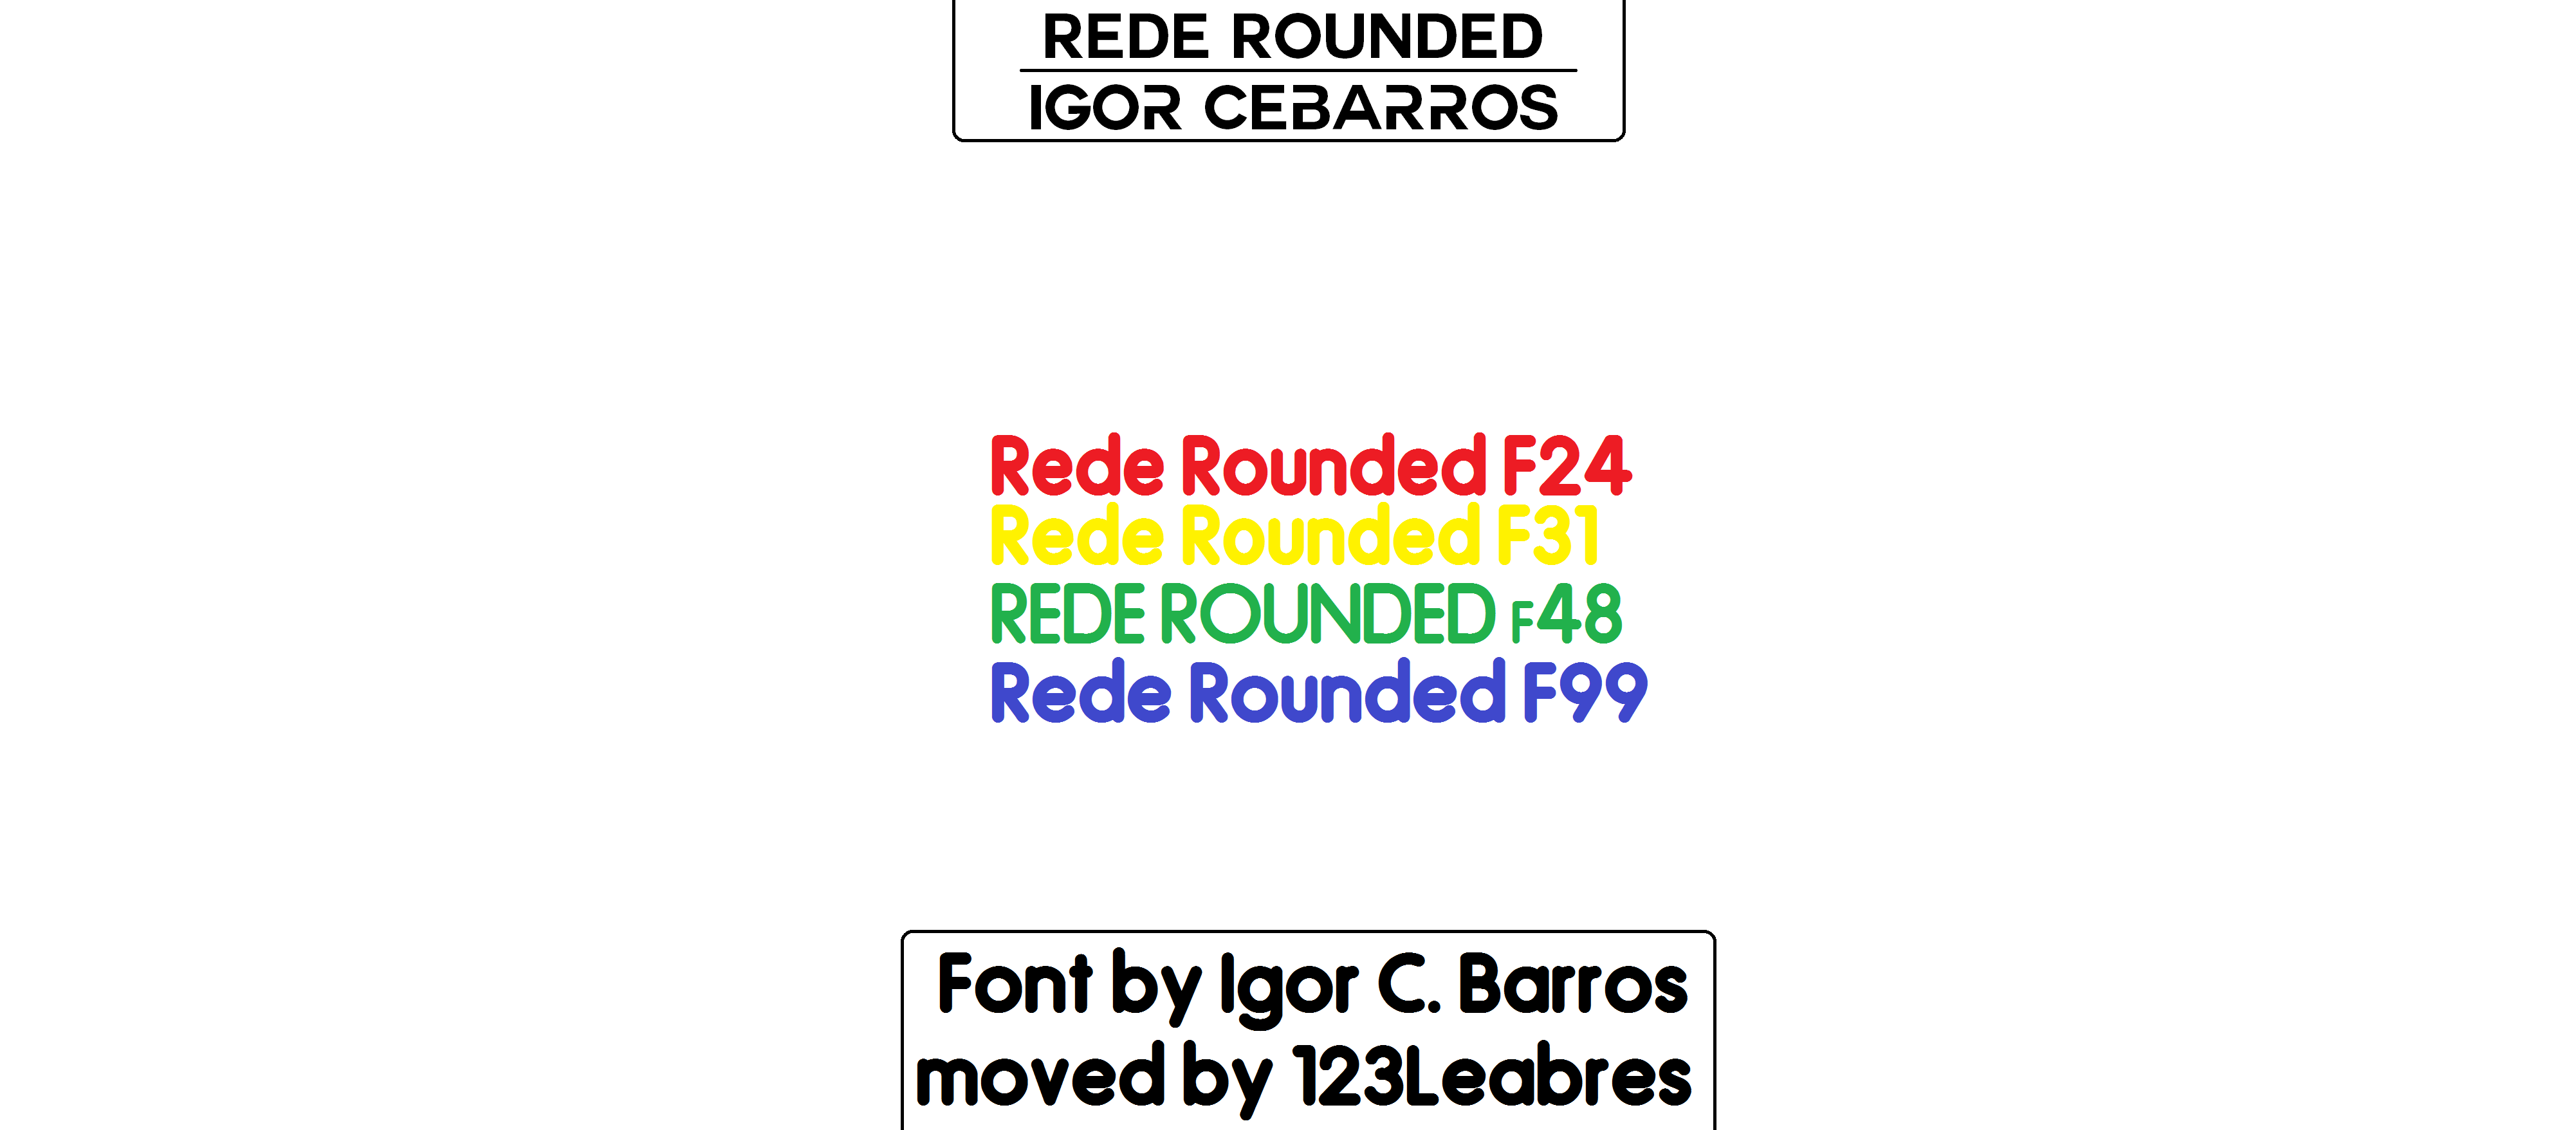 Rede Rounded F24 font